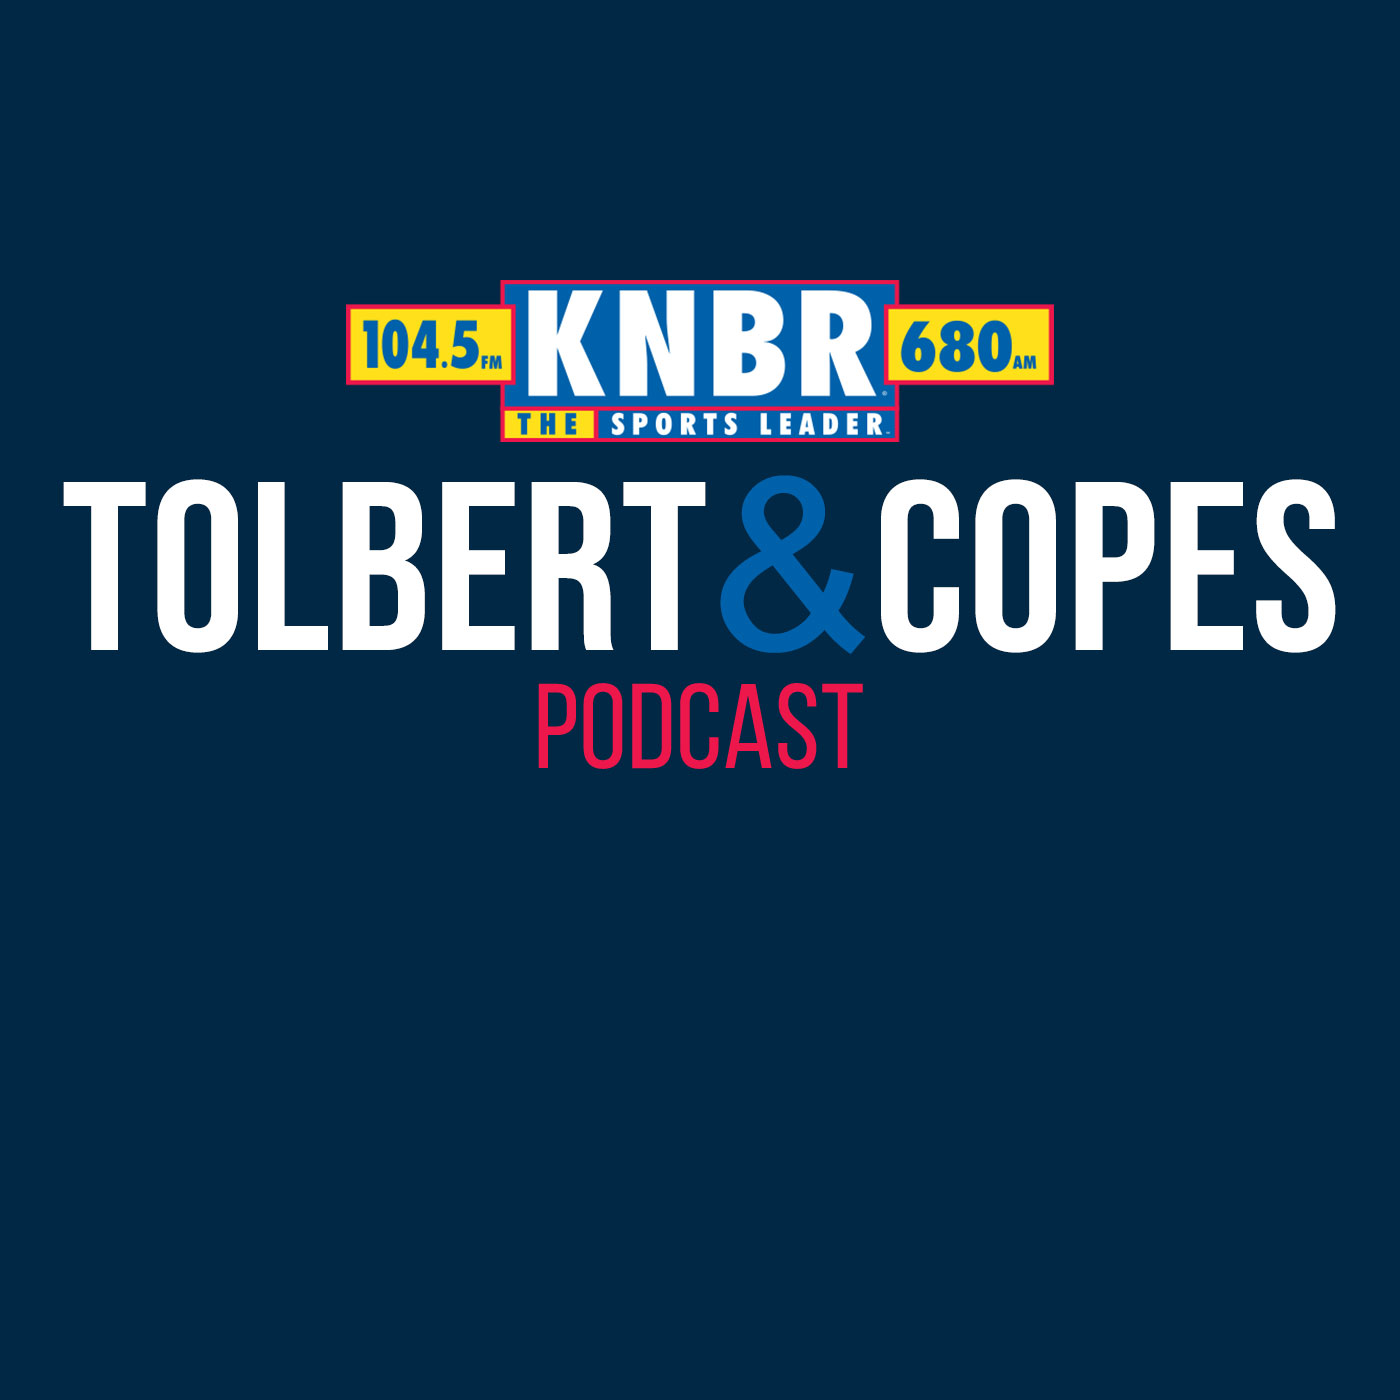 6-25 Rick Celebrini joins Tolbert & Copes to discuss working with the Warriors & his son potentially being the Sharks #1 pick